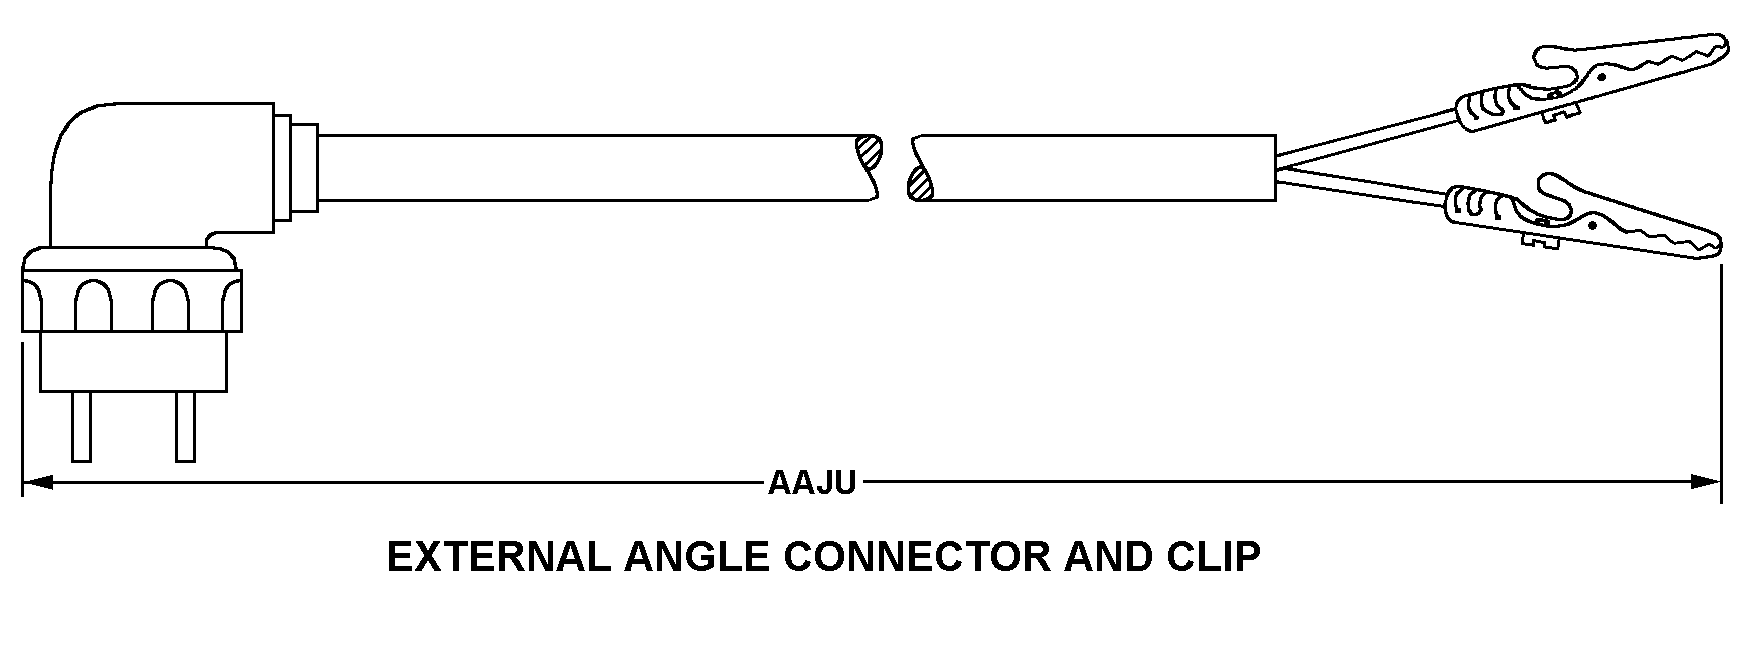 EXTERNAL ANGLE CONNECTOR AND CLIP style nsn 6150-00-234-6998